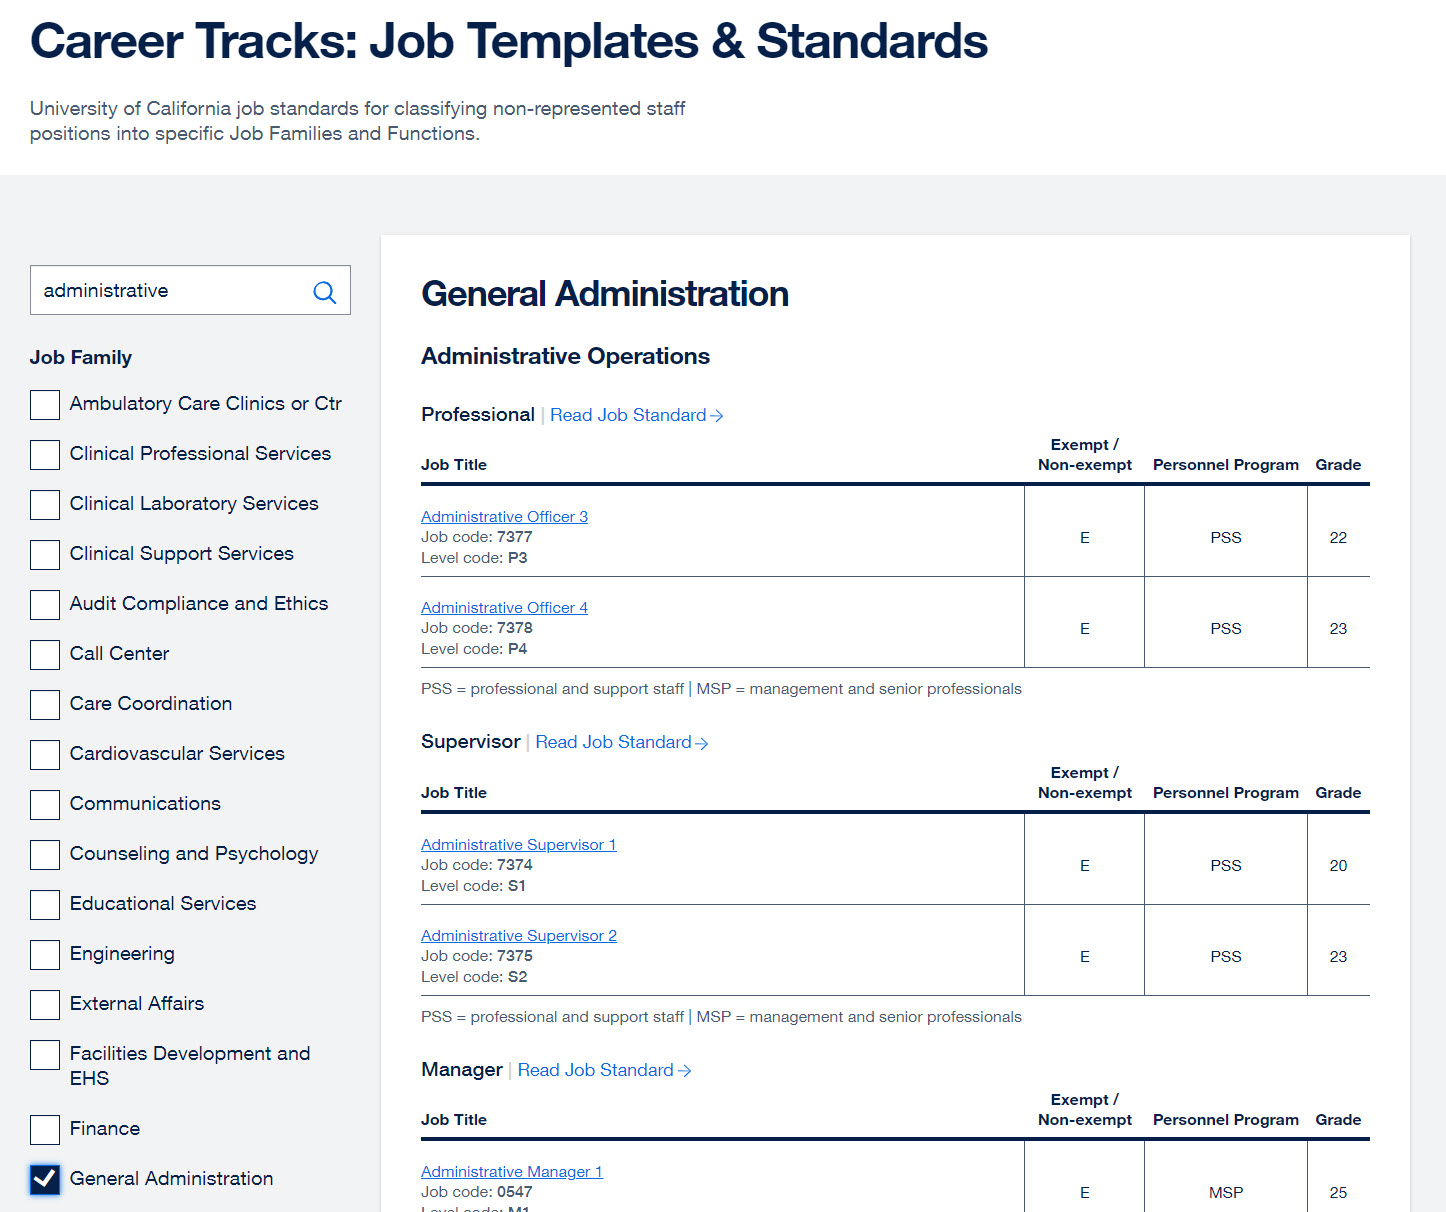 UCSF HR Career Tracks screenshot of job standards for Administration, from professional to supervisor and manager